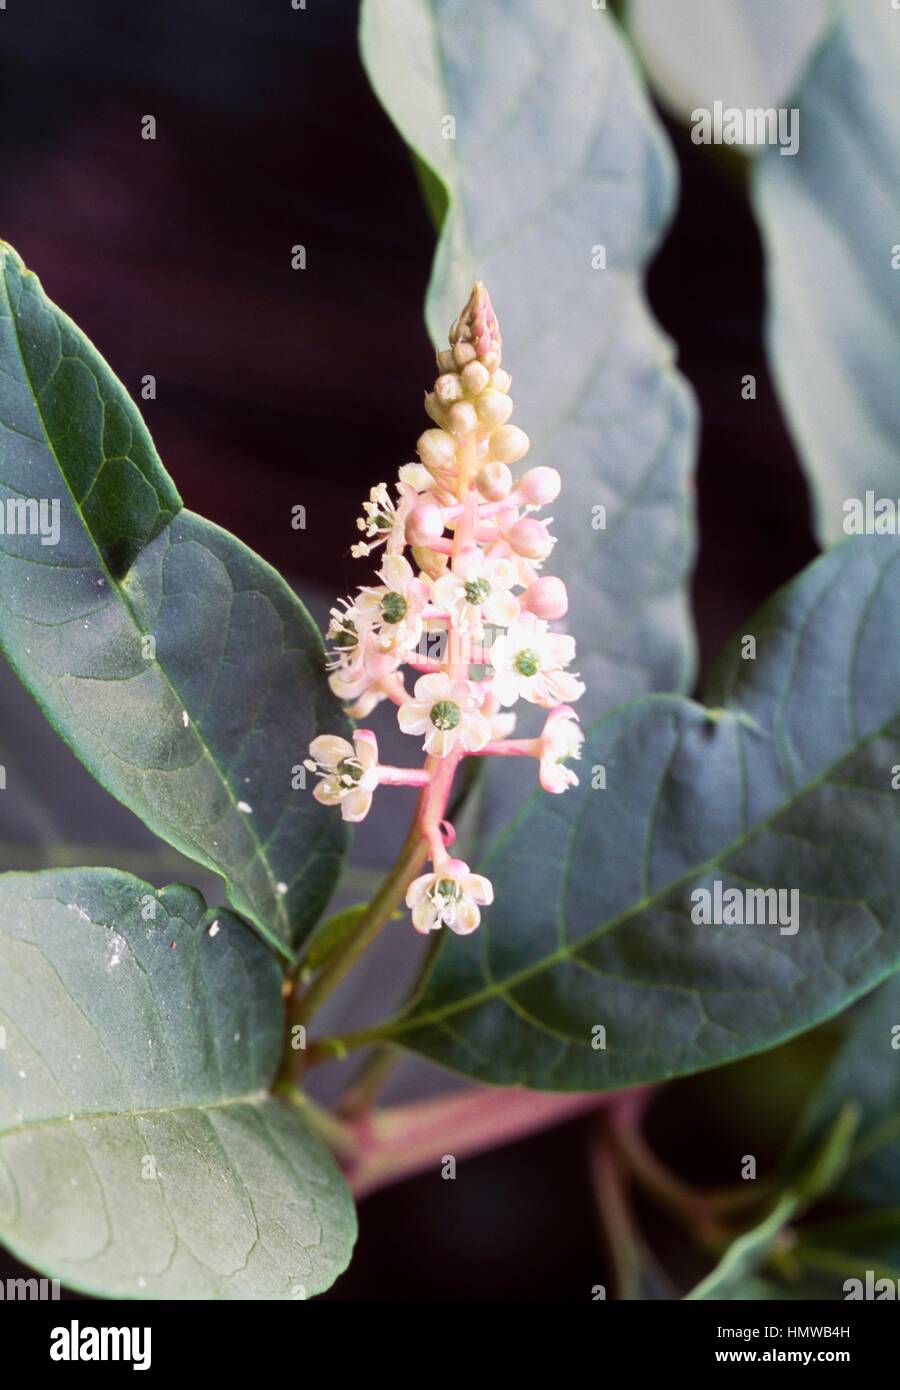 American Pokeweed fruits (Phytolacca americana or Phytolacca decandra), Phytolaccaceae. Stock Photo